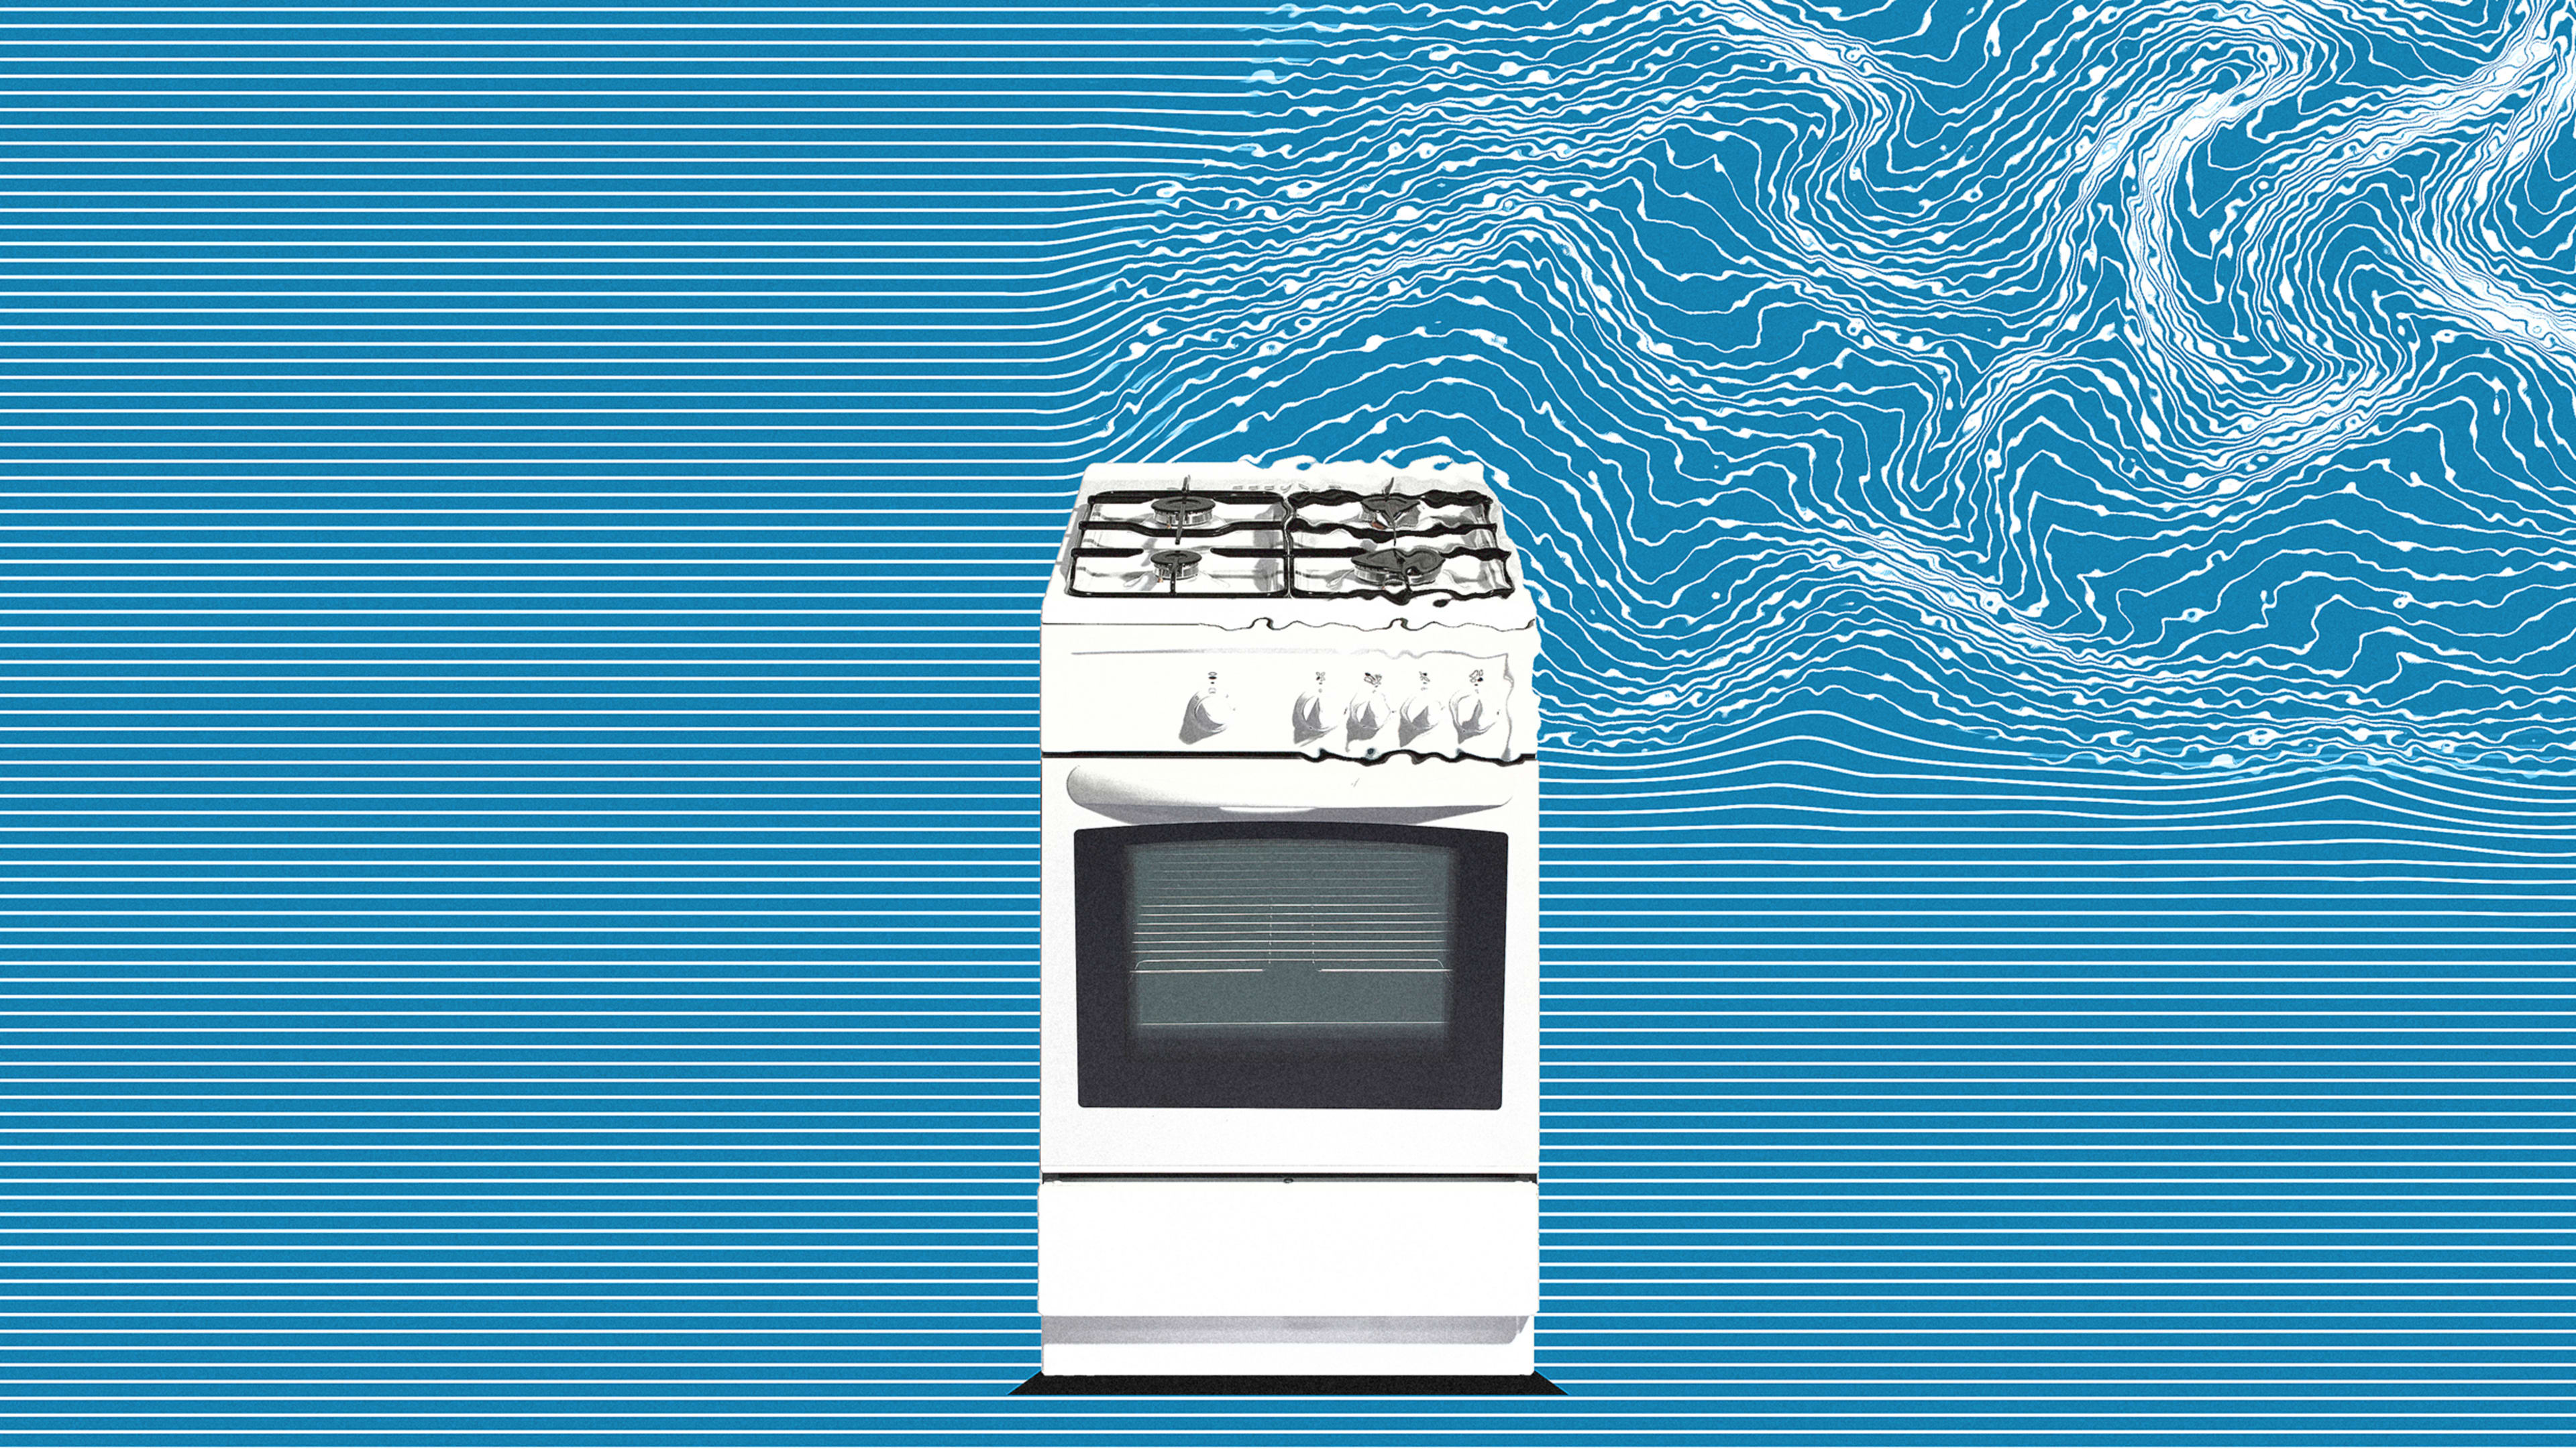 Your gas stove is leaking methane, even when it’s turned off